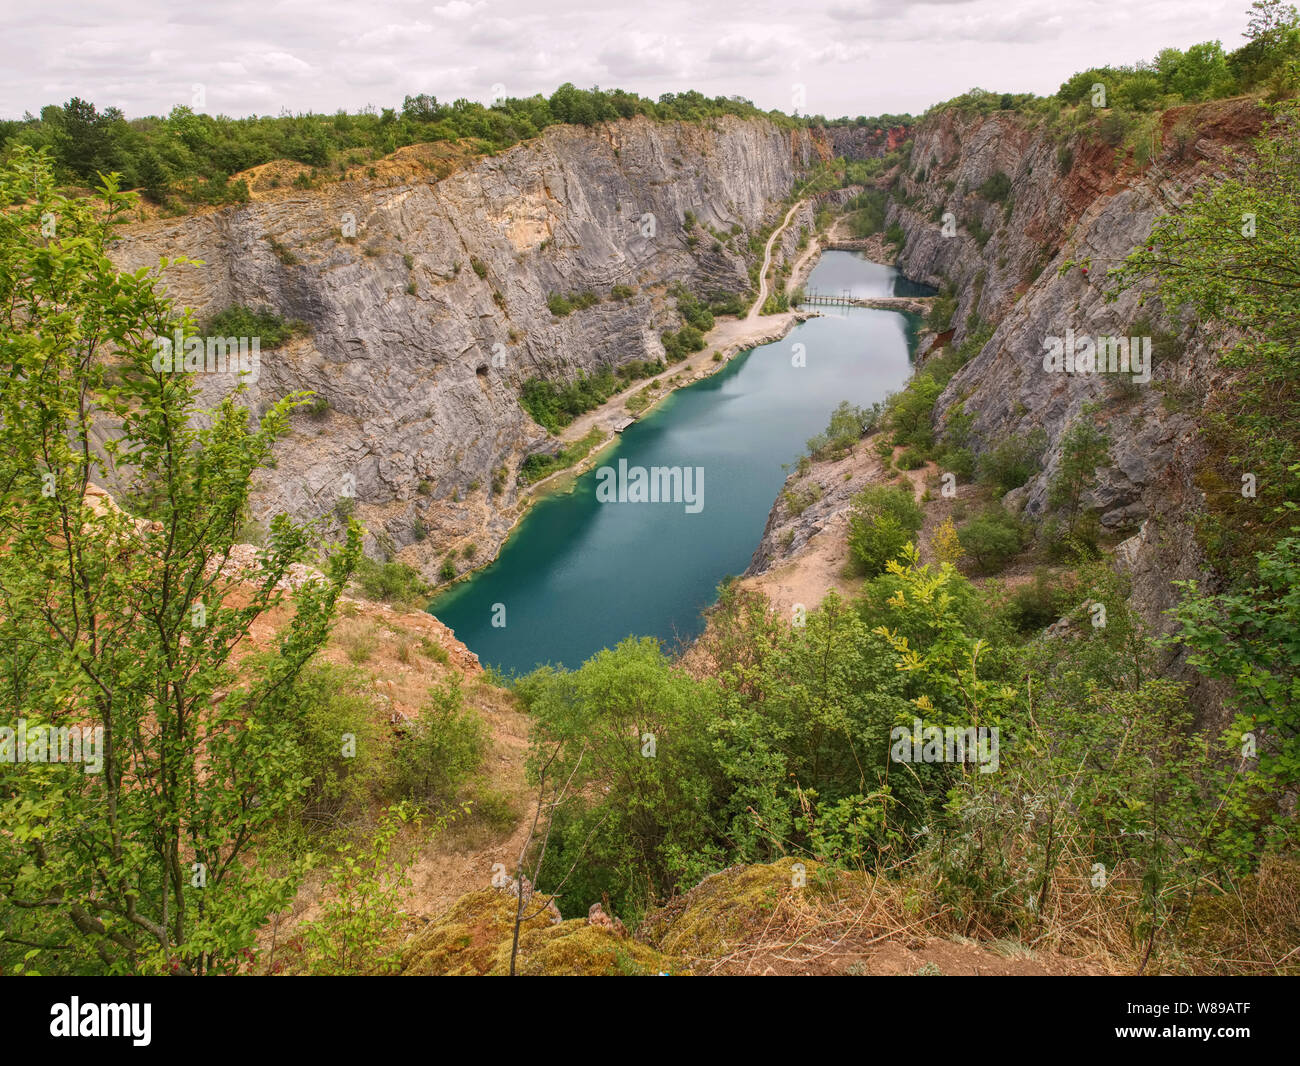 Velka Amerika is abandoned dolomite quarry for cement production. Czech Republic, Europe. Stock Photo